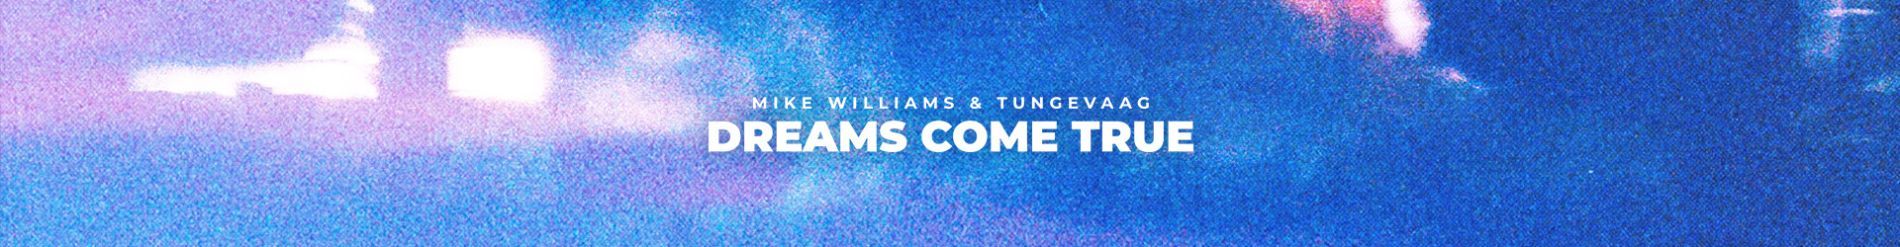 WIN A CALL WITH MIKE WILLIAMS & TUNGEVAAG!